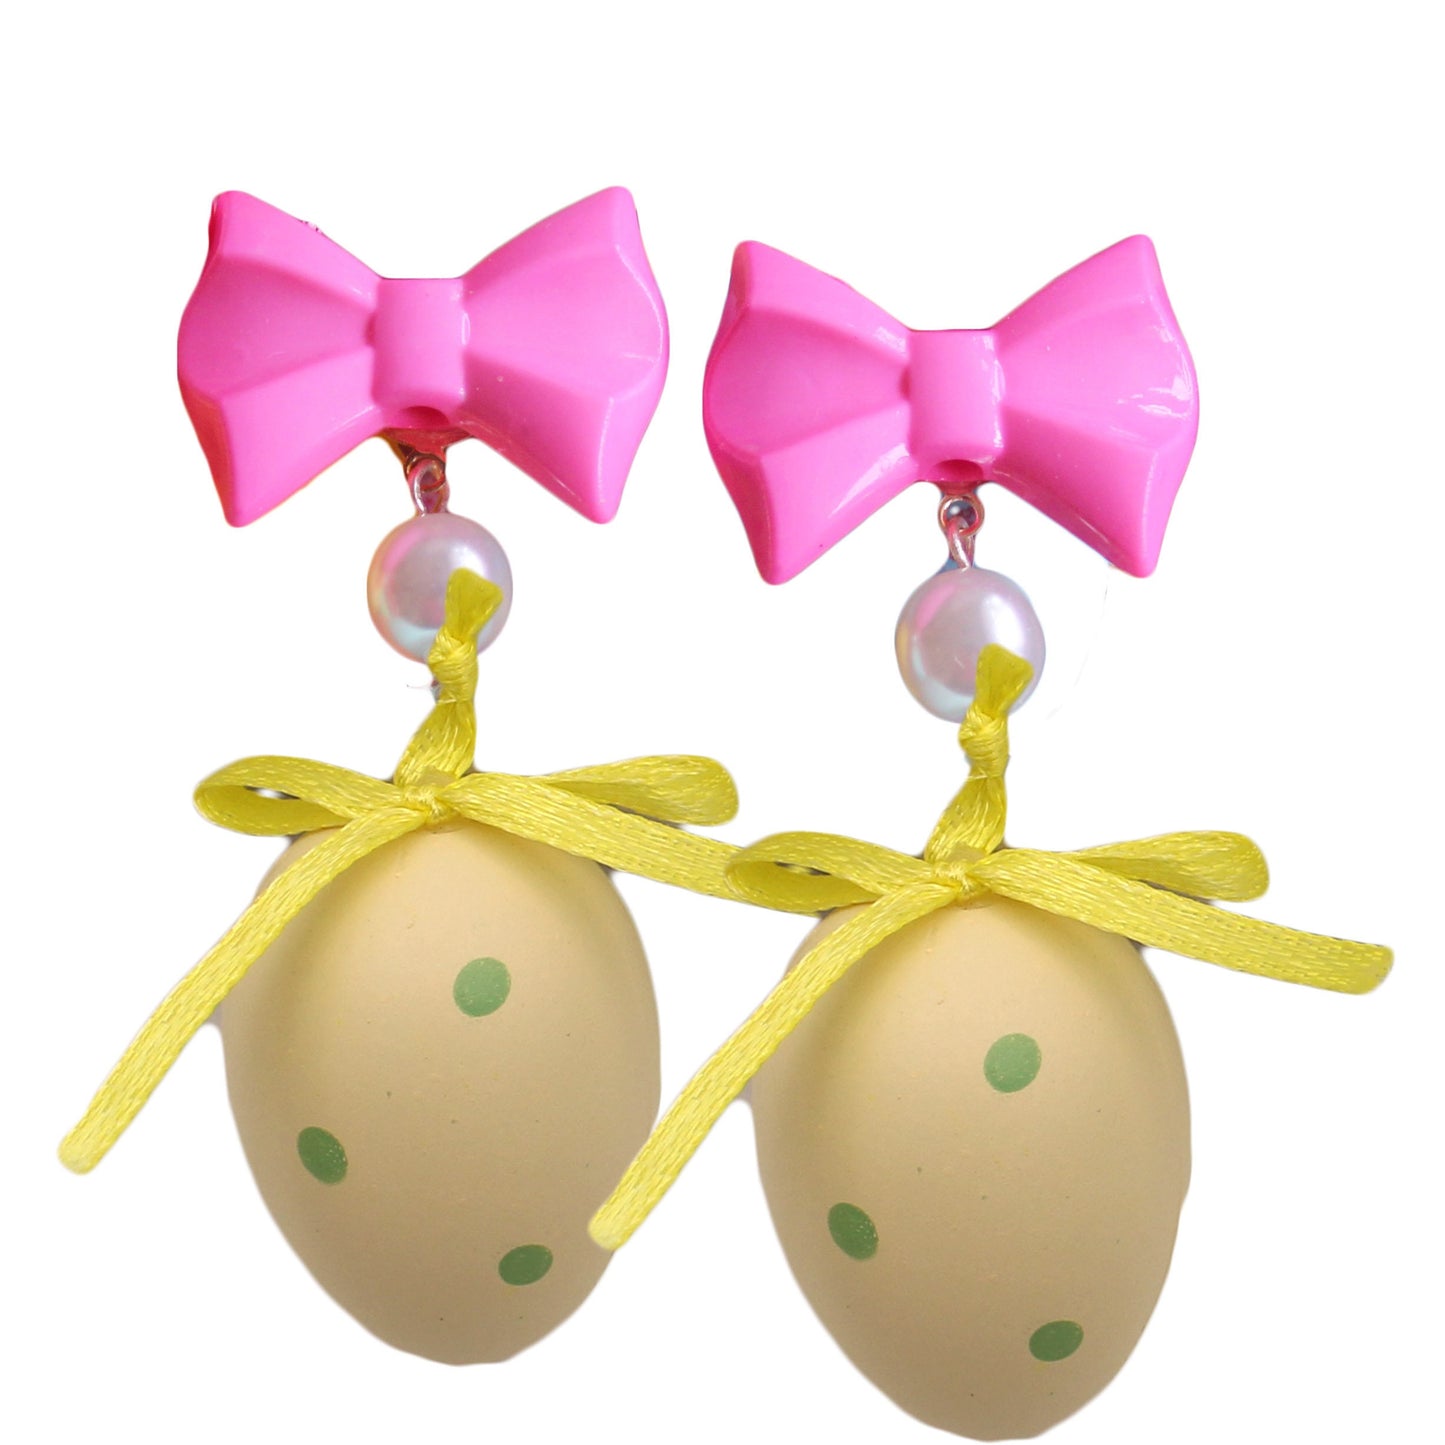 Easter Egg Earrings - More Colors and Styles - Hypoallergenic